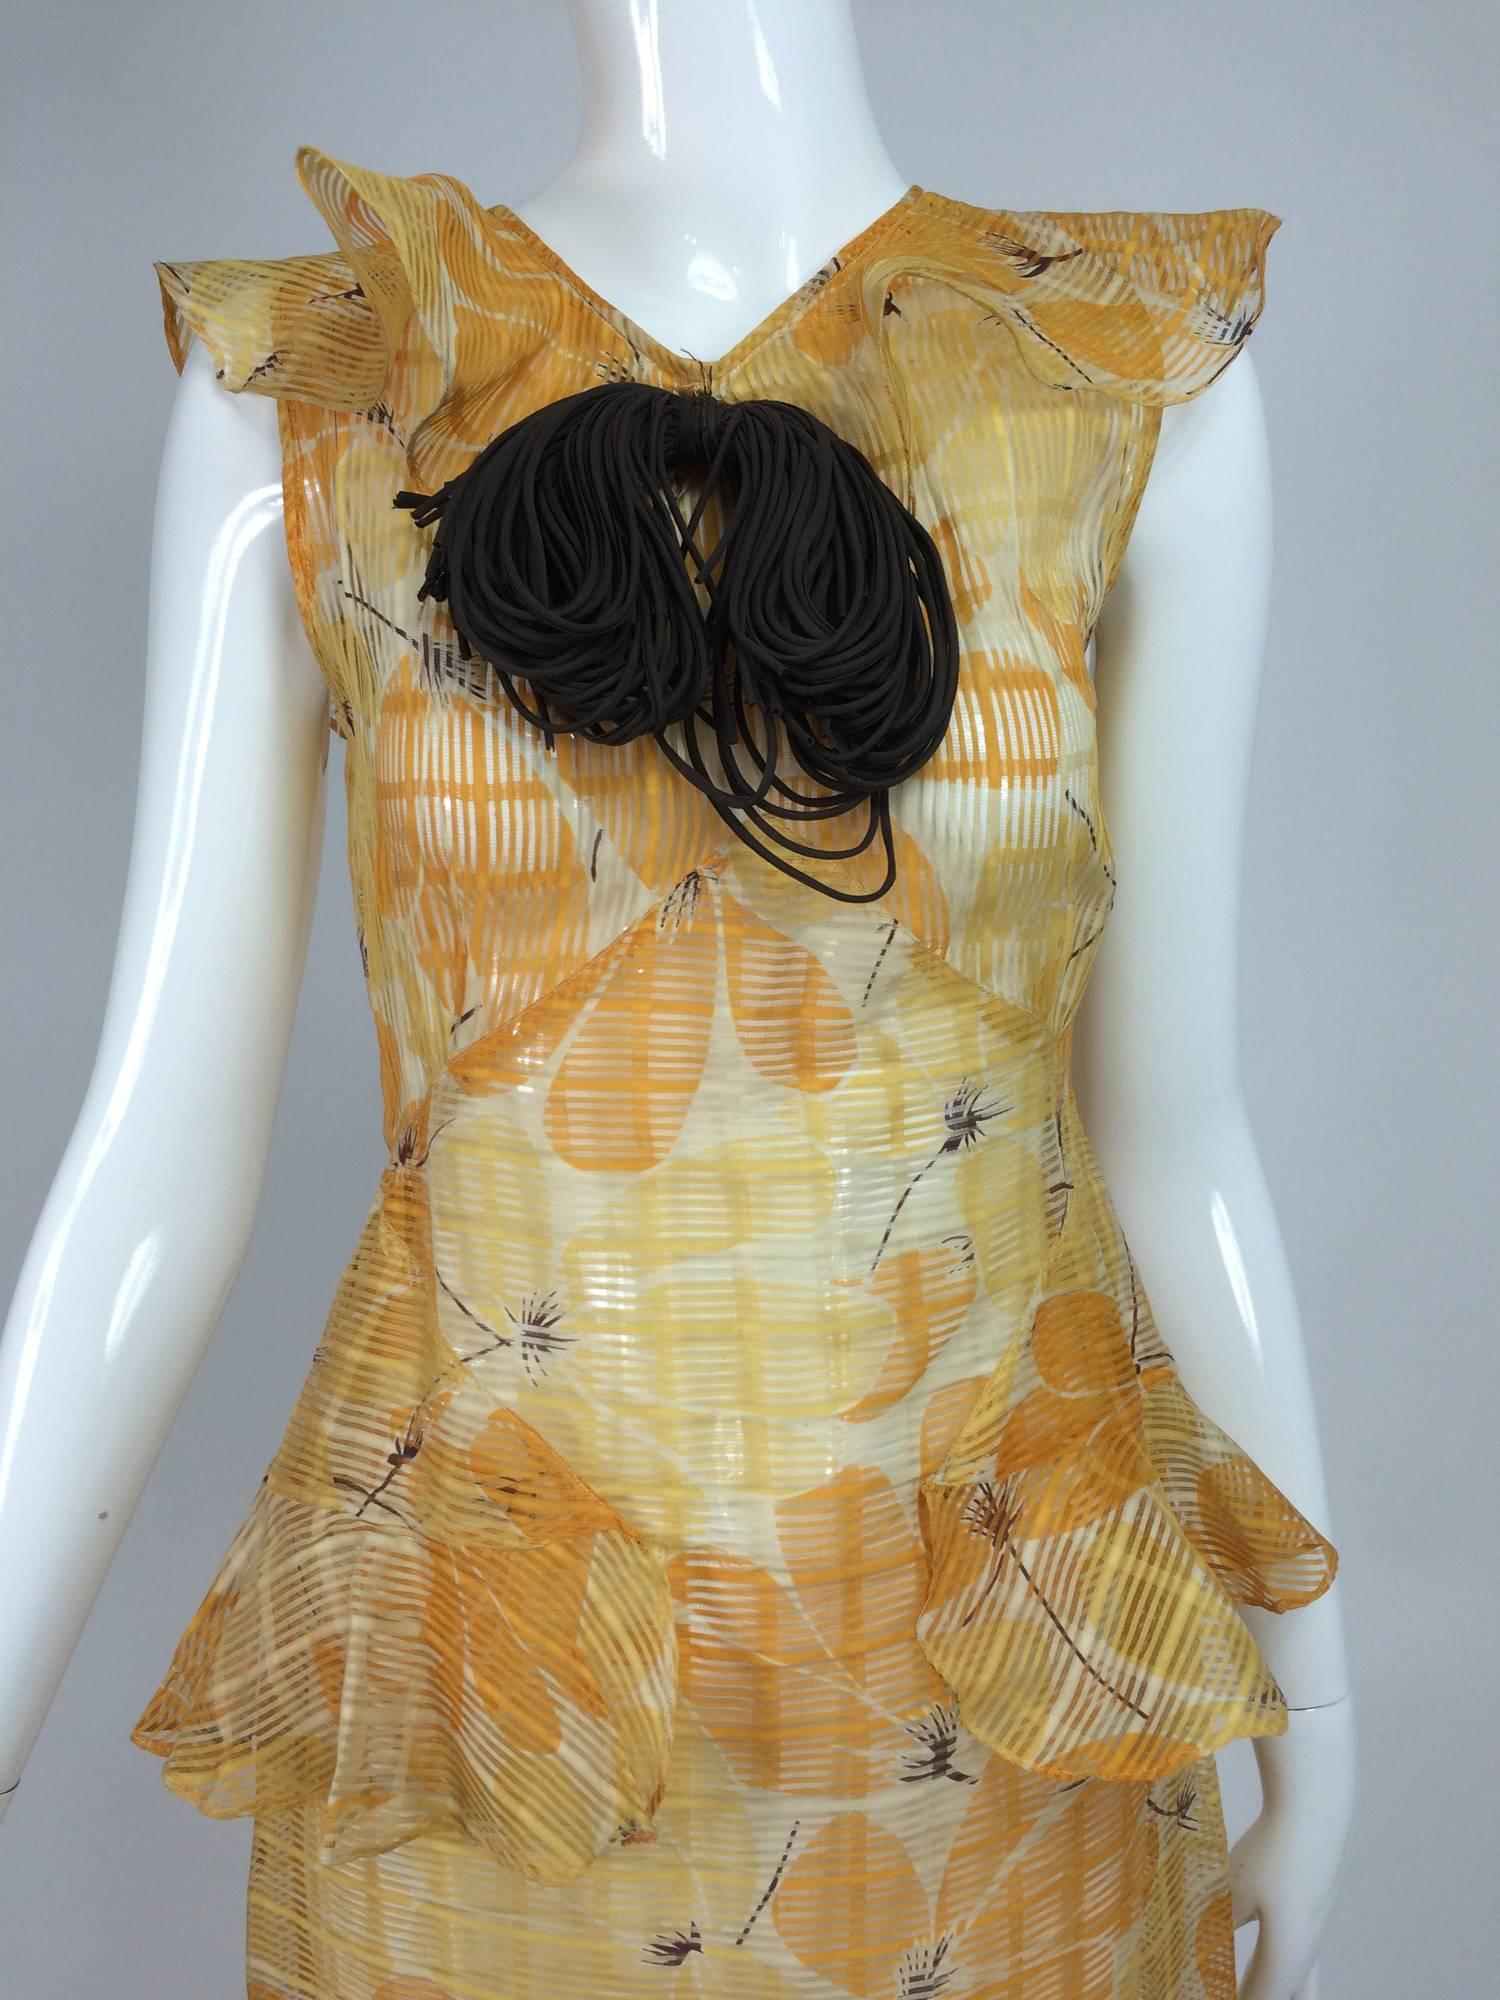 Unworn, sheer woven (in a grid pattern) organdy dress from the 1930s, in a very modern, for the time, print of tonal orange flowers that have brown stems and centers, set against a cream ground...The sleeveless dress has a ruffle at the front that